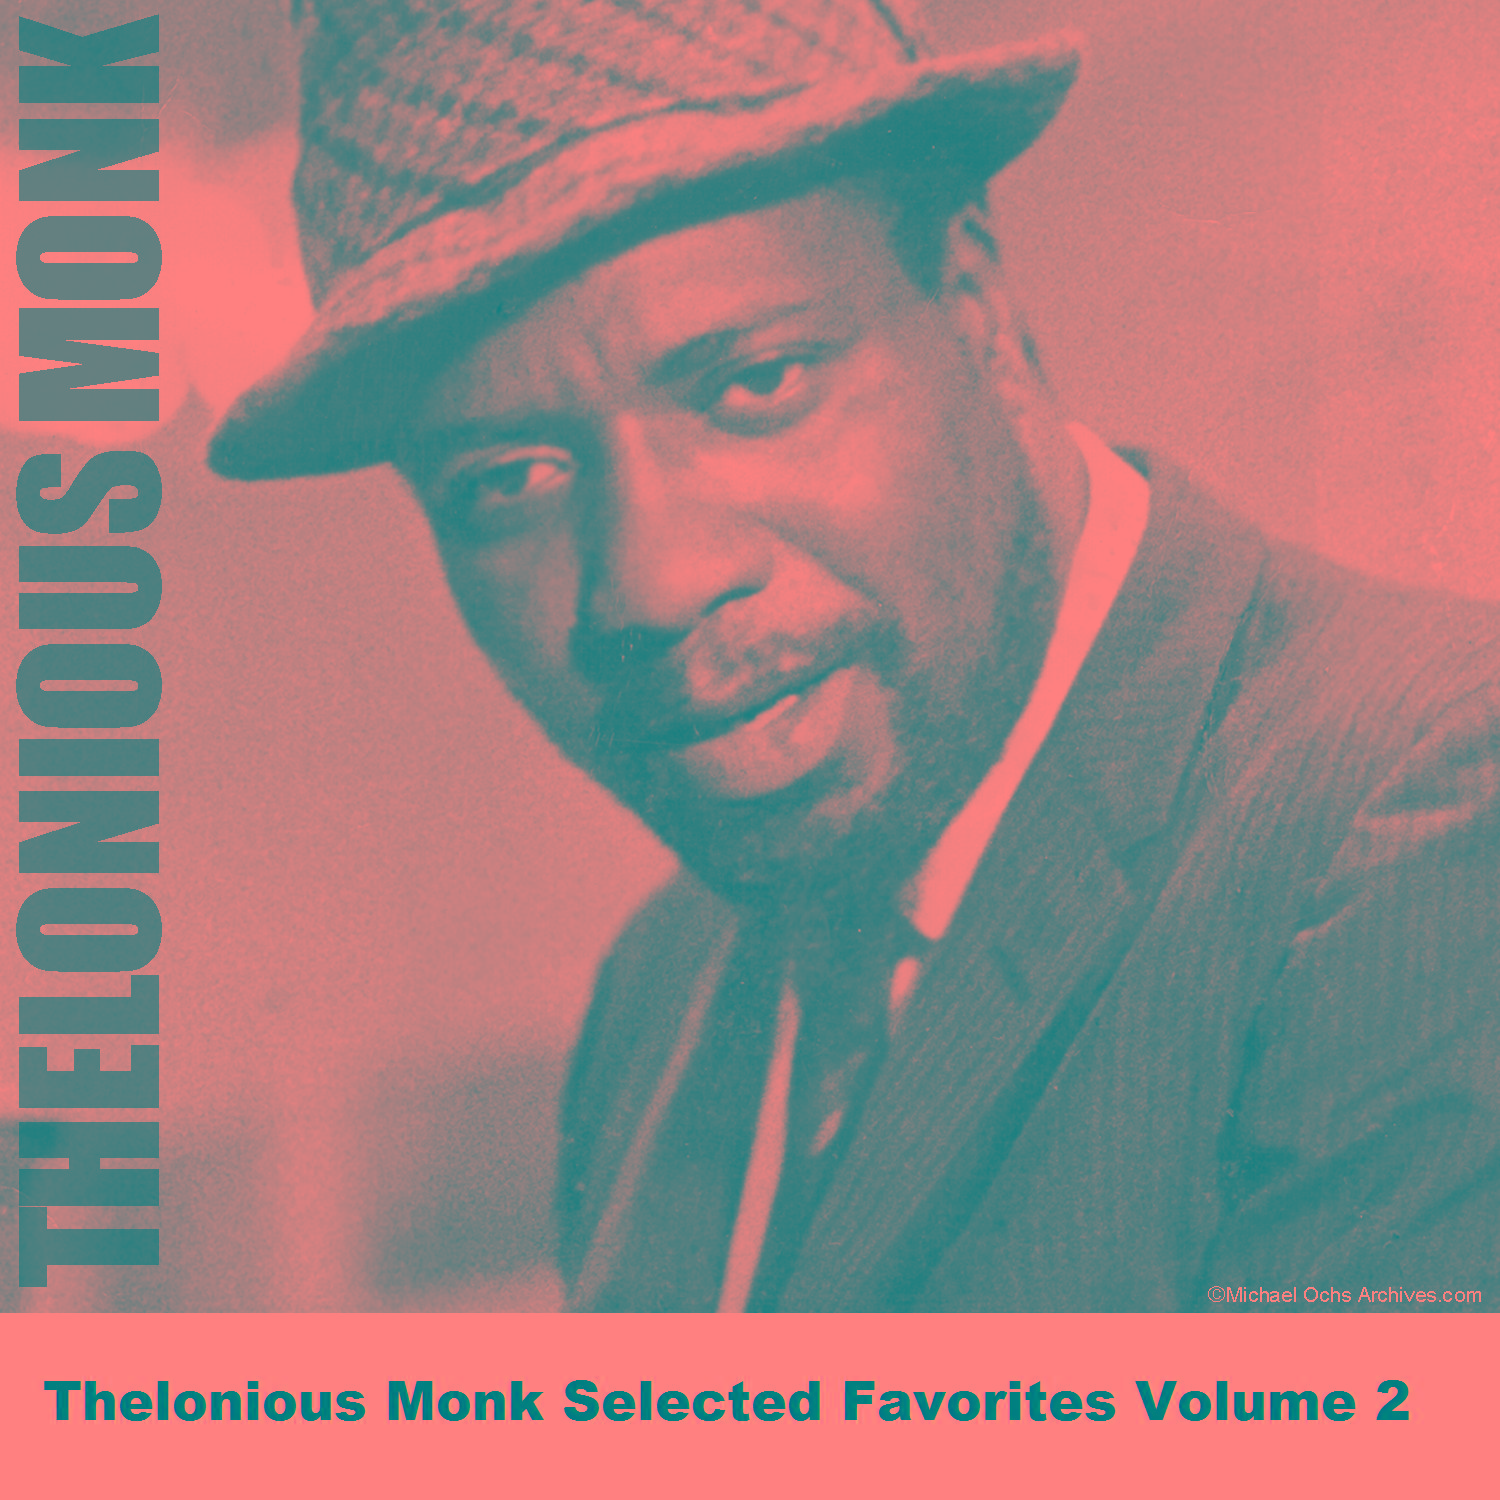 Thelonious Monk Selected Favorites Volume 2